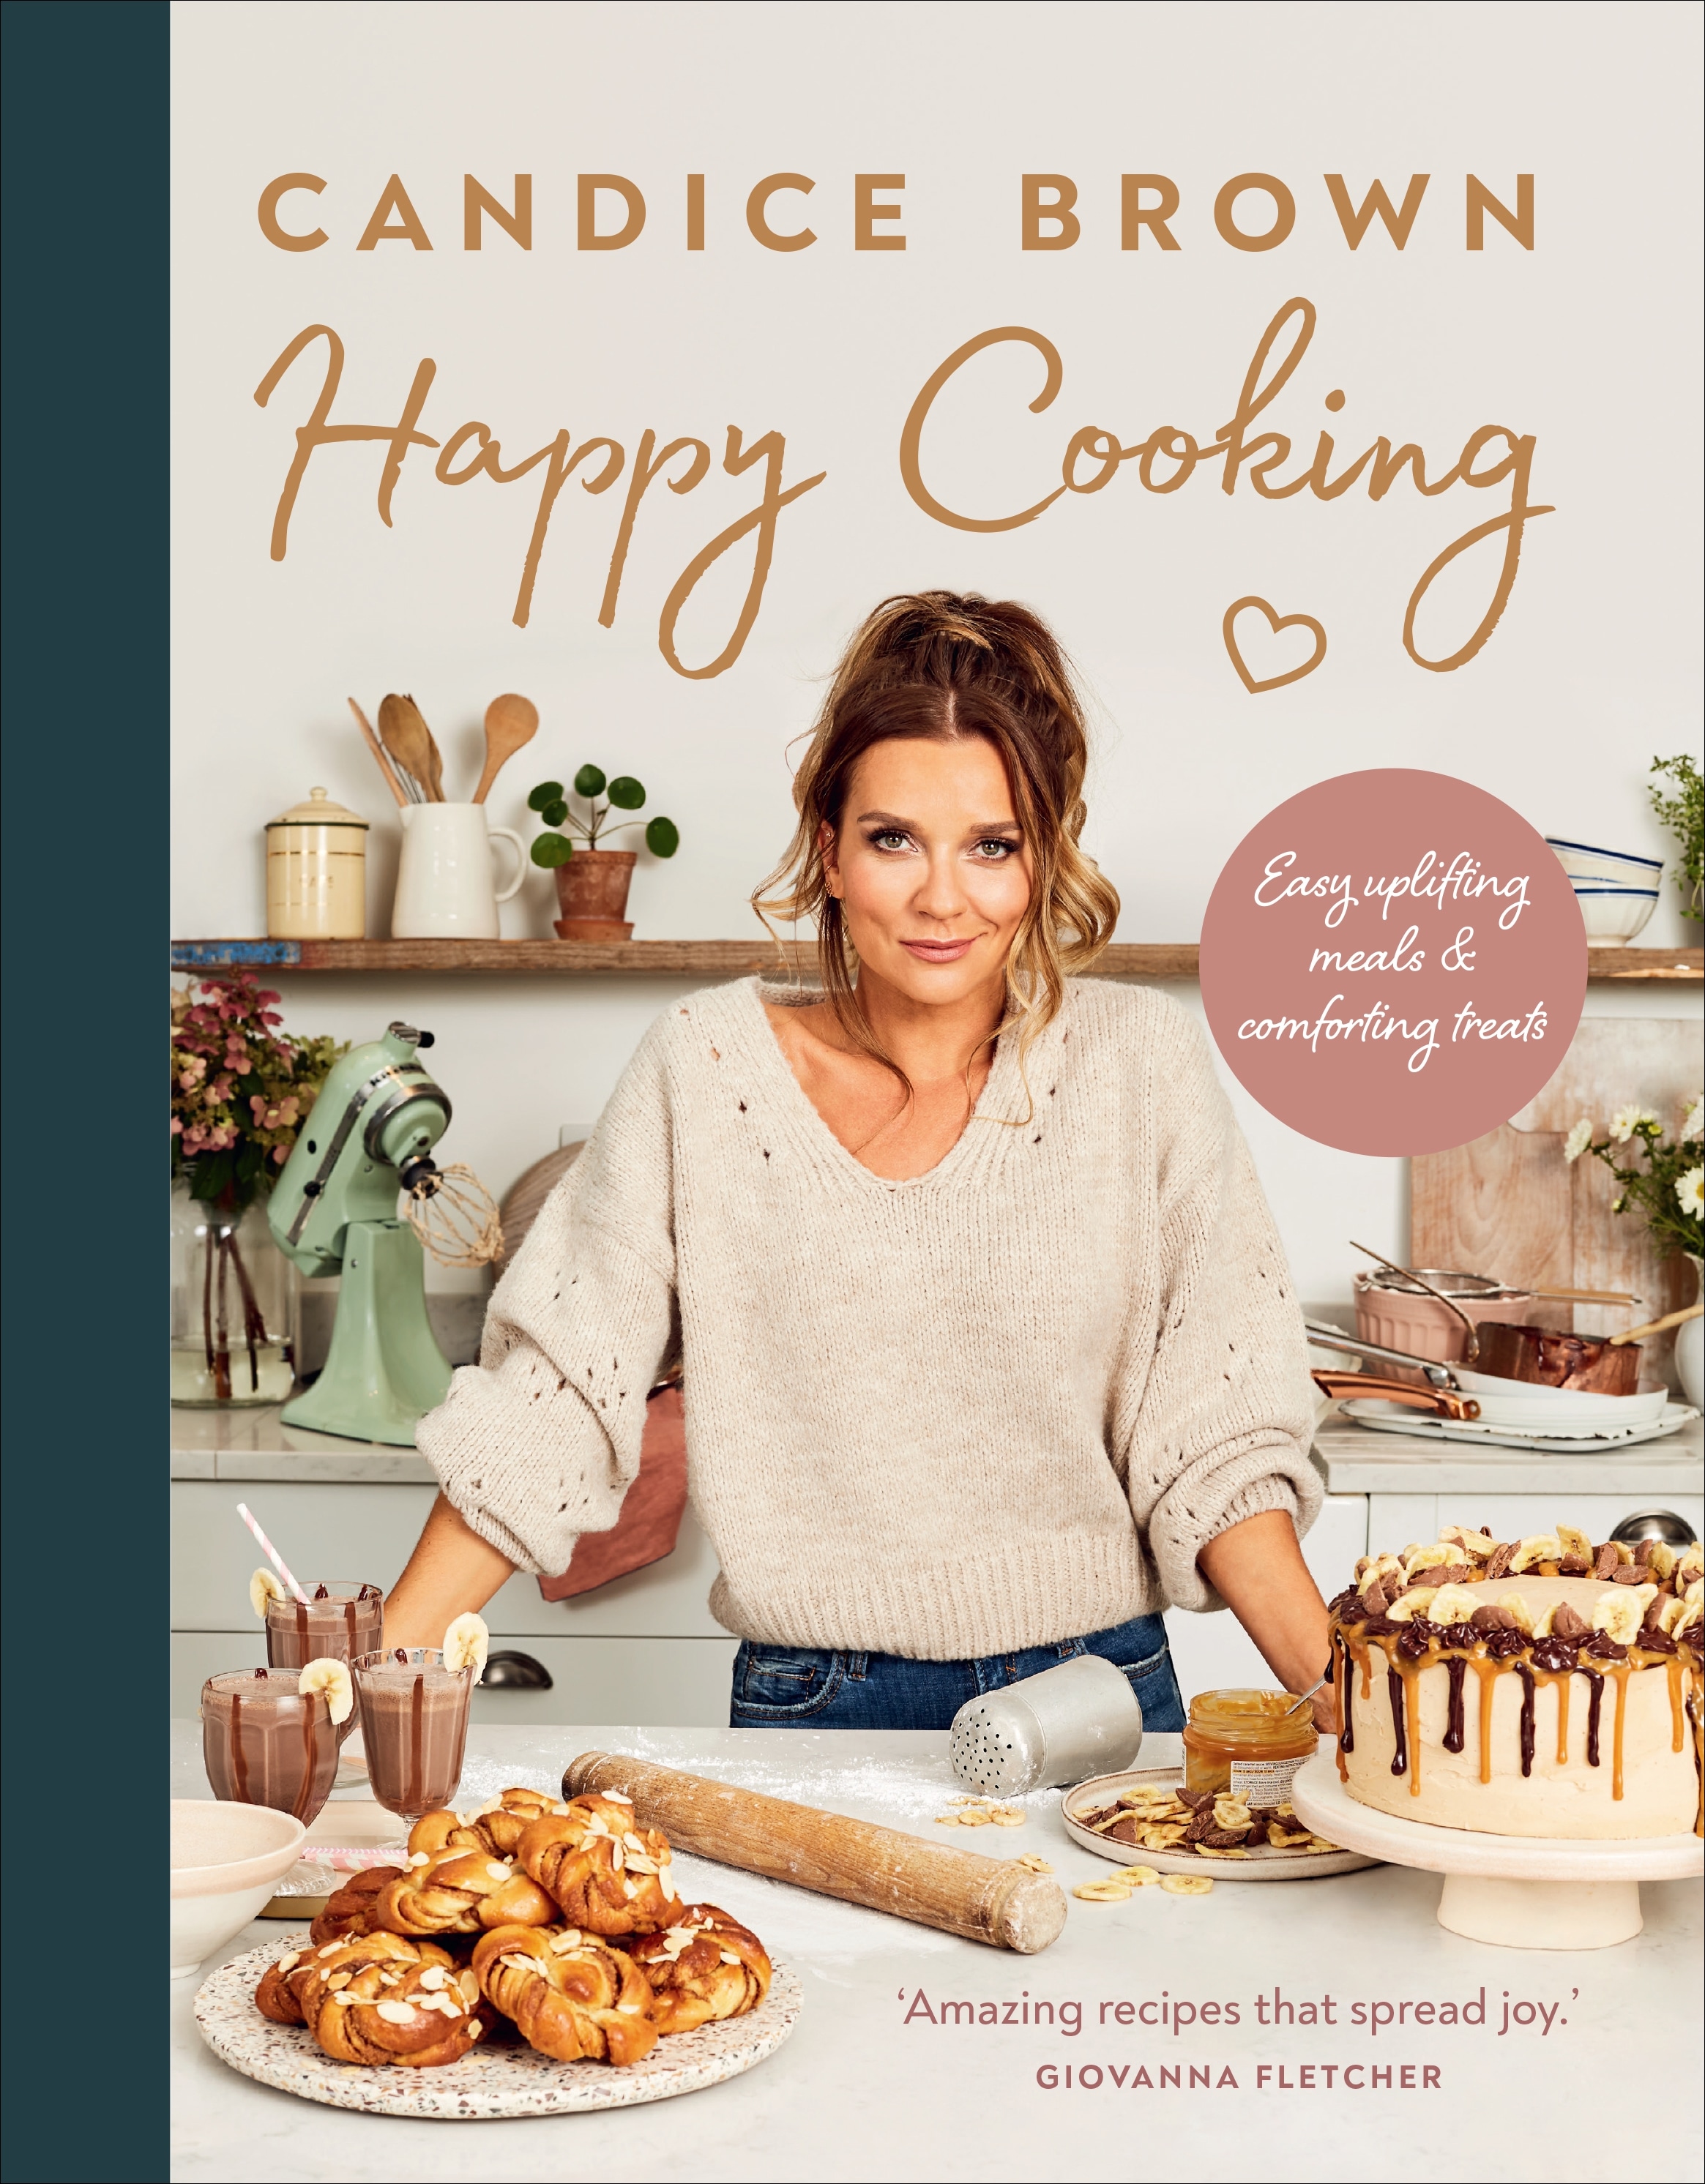 Book “Happy Cooking” by Candice Brown — July 1, 2021